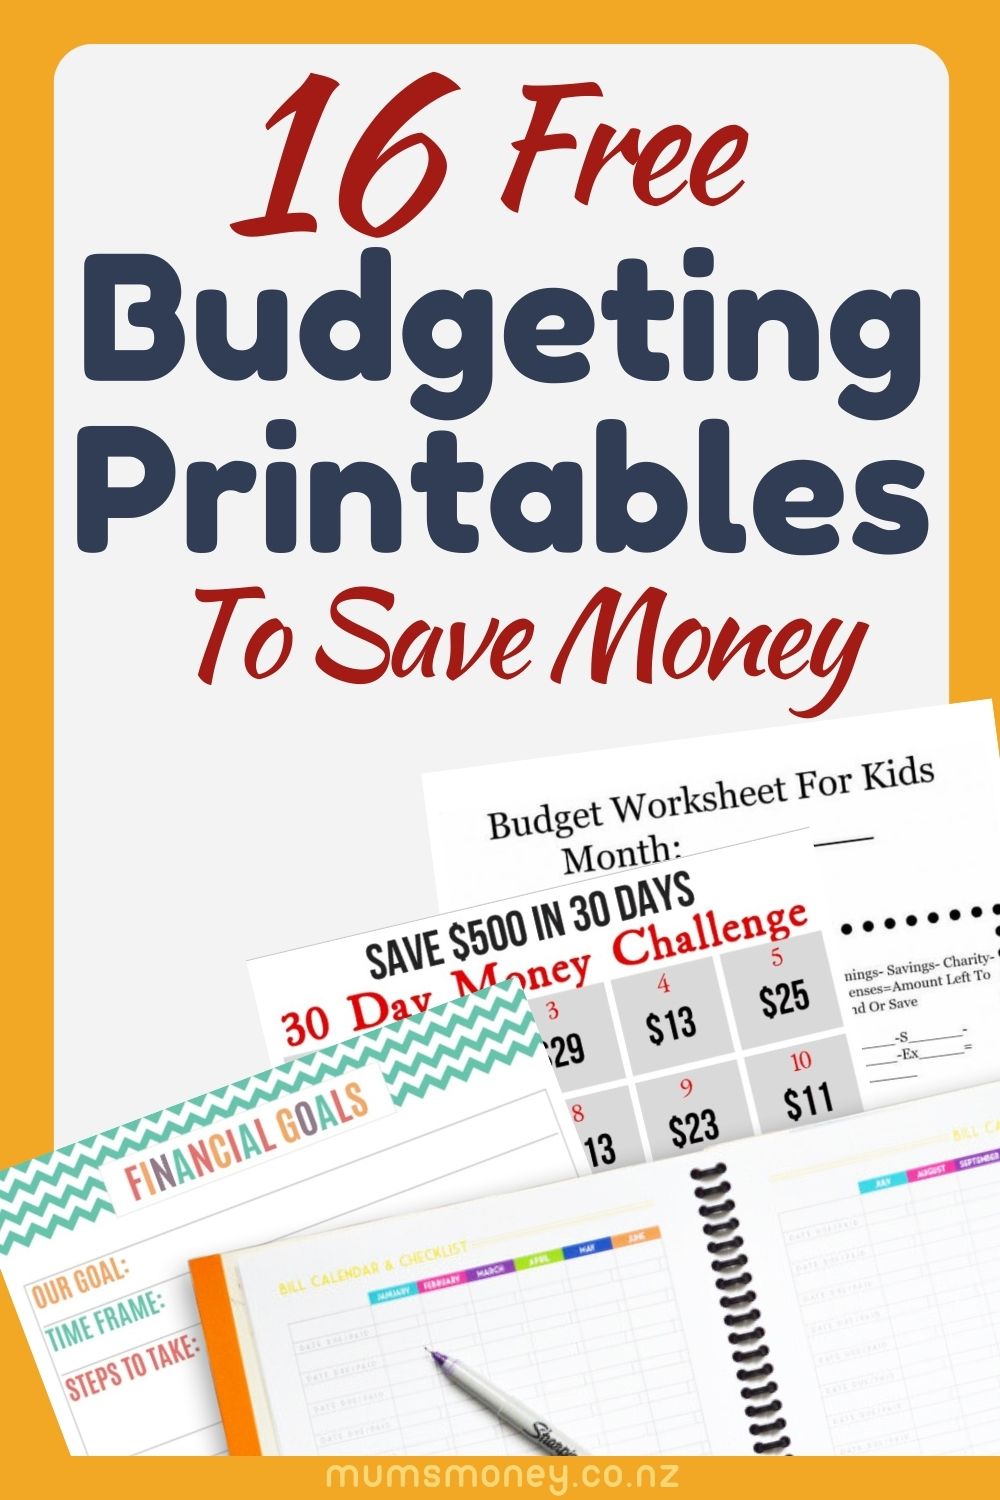 16 Free Budgeting Printables To Save Money in 2023 Pin Image